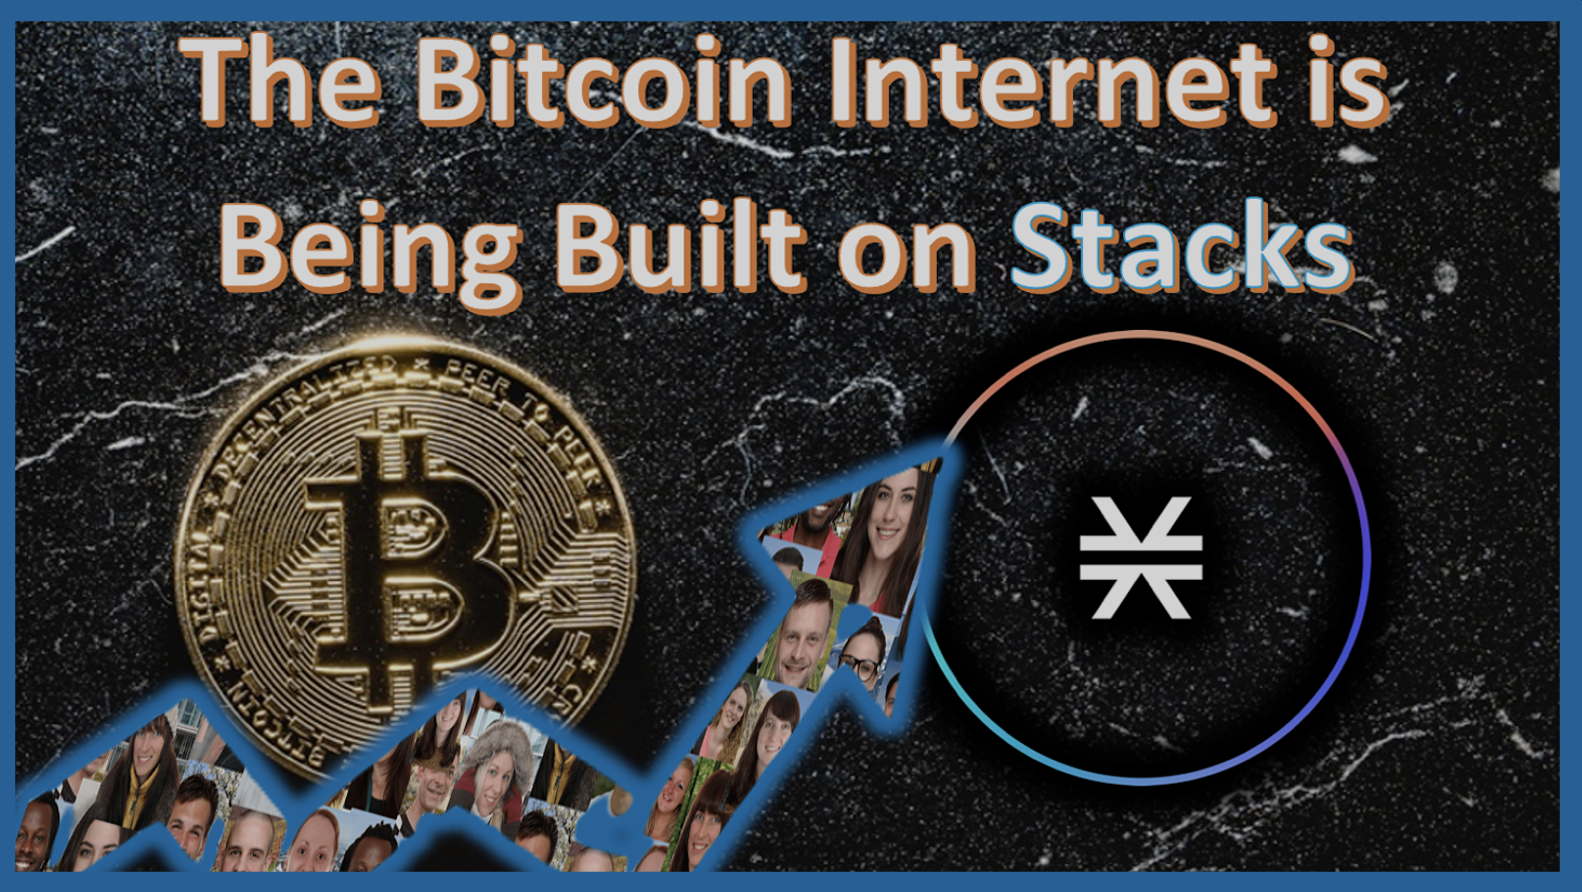 Stacks is building the Internet of Bitcoin